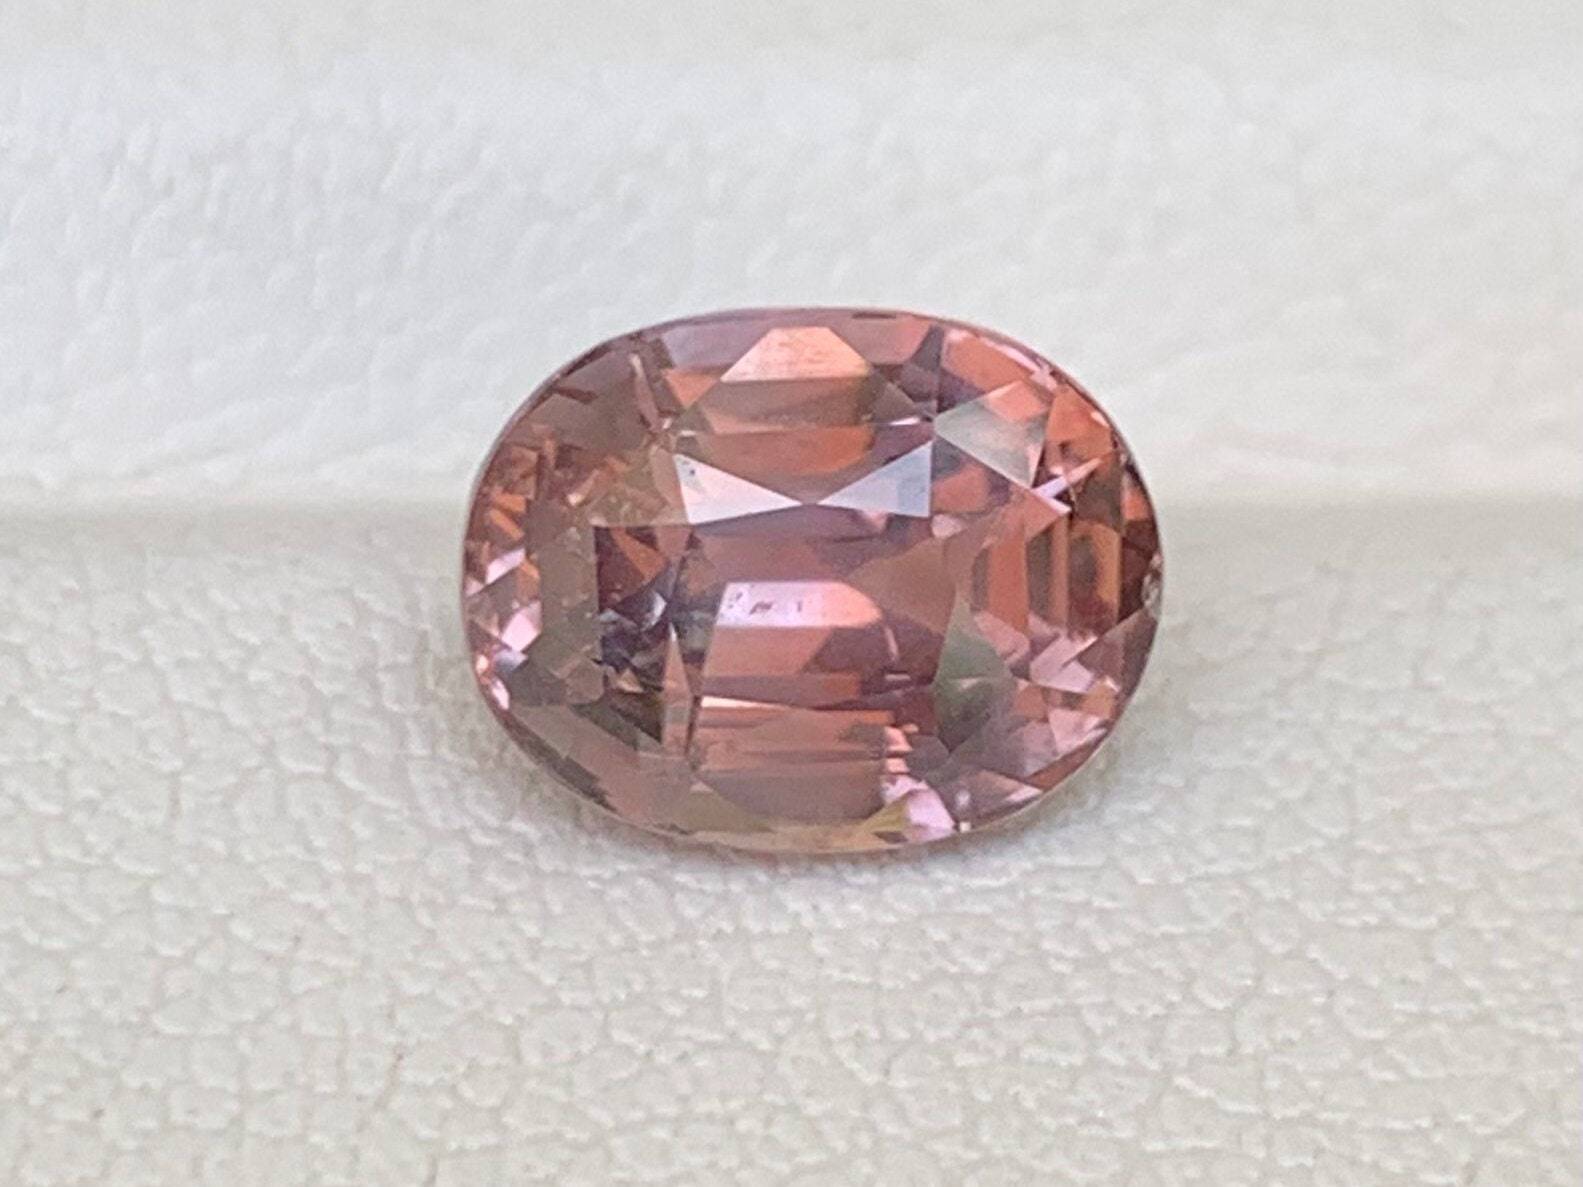 2.67 Cts Unheated Padparadscha Sapphire - ( UH ) - Baza Boutique 